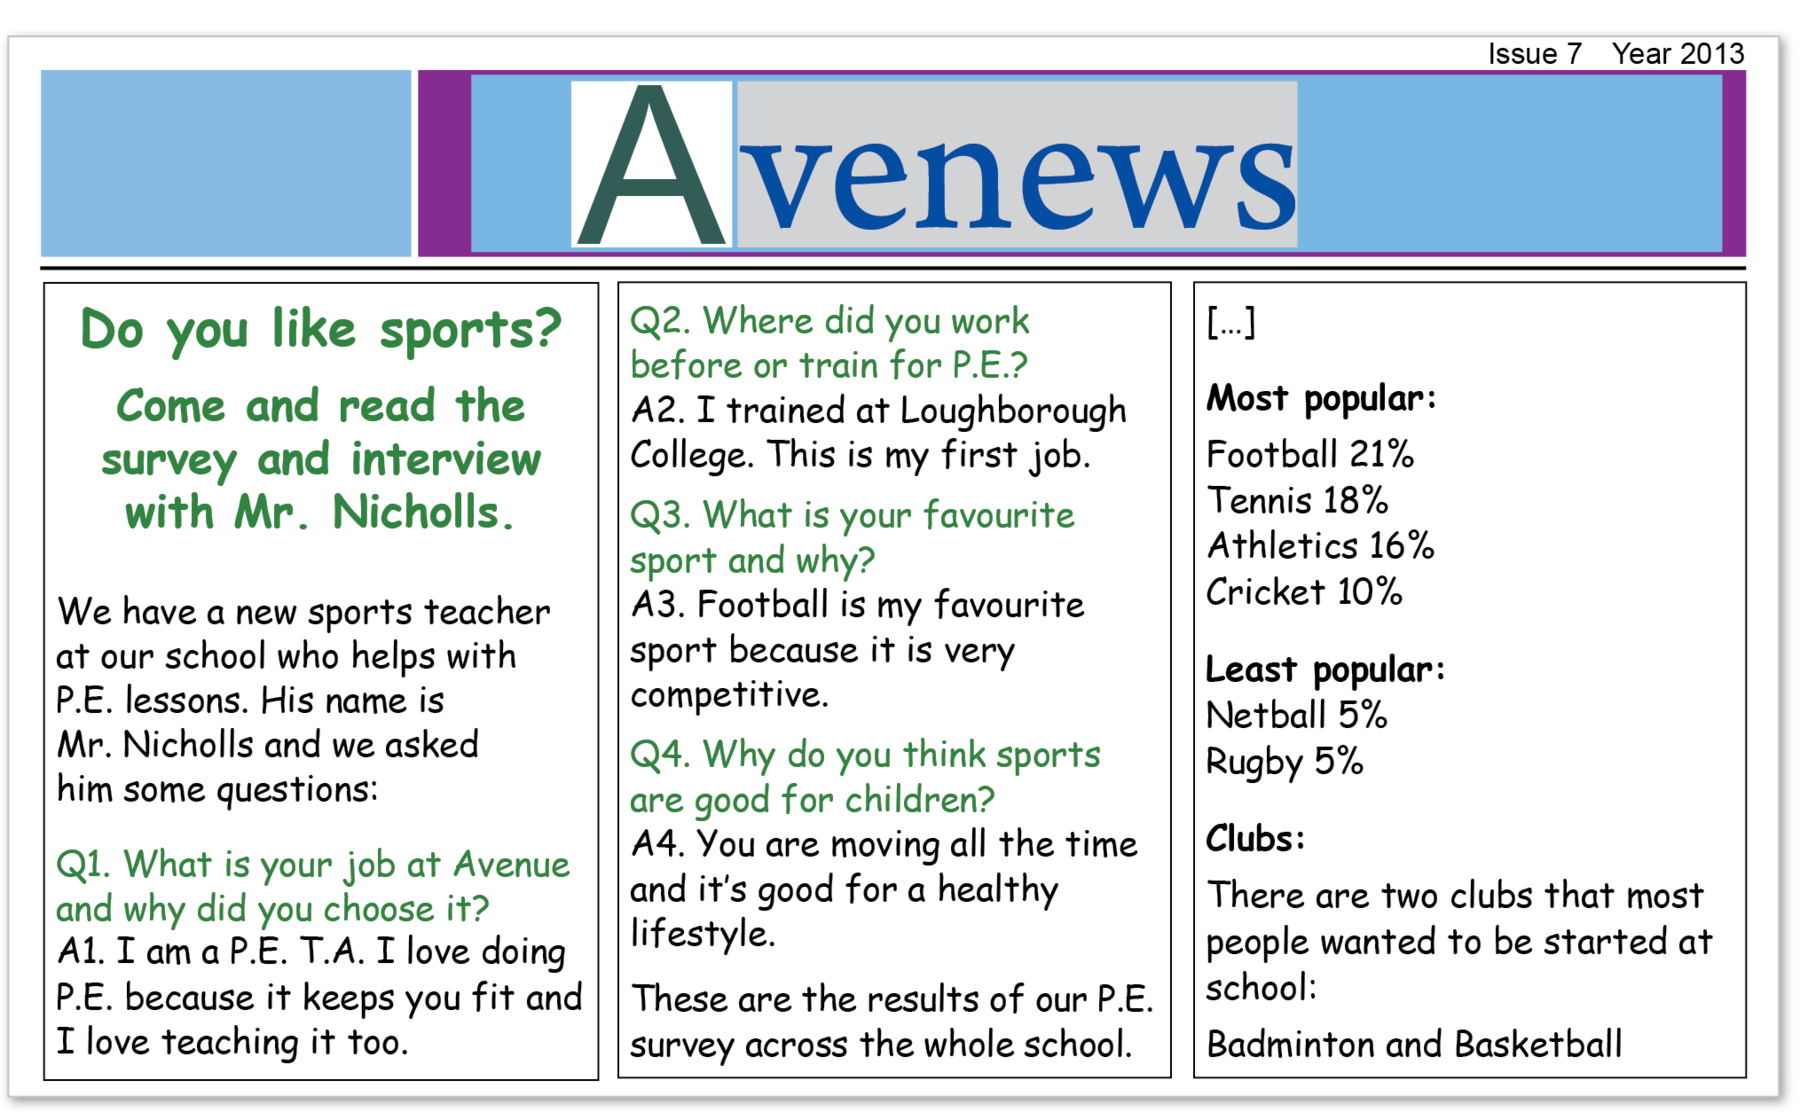 Reprodução de página de revista. Nome da revista: Avenews. Título da entrevista em verde: Do you like sports? Come and read the survey and interview with Mister. Nicholls. Texto da entrevista: We have a new sports teacher at our school who helps with Physical education lessons. His name is Mister Nicholls and we asked him some questions: Question one. What is your job at Avenue and why did you choose it? Answer one. I am a Physical education teacher. I love doing Physical education because it keeps you fit and I love teaching it too. Question two. Where did you work before or train for Physical education? Answer two. I trained at Loughborough College. This is my first job. Question three. What is your favourite sport and why? Answer three. Football is my favourite sport because it is very competitive. Question four. Why do you think sports are good for children? Answer four. You are moving all the time and it‛s good for a healthy lifestyle. These are the results of our Physical education survey across the whole school. (supression mark) Most popular: Football 21%. Tennis 18%. Athletics 16%. Cricket 10%. Least popular: Netball 5%. Rugby 5%. Clubs: There are two clubs that most people wanted to be started at school: Badminton and Basketball